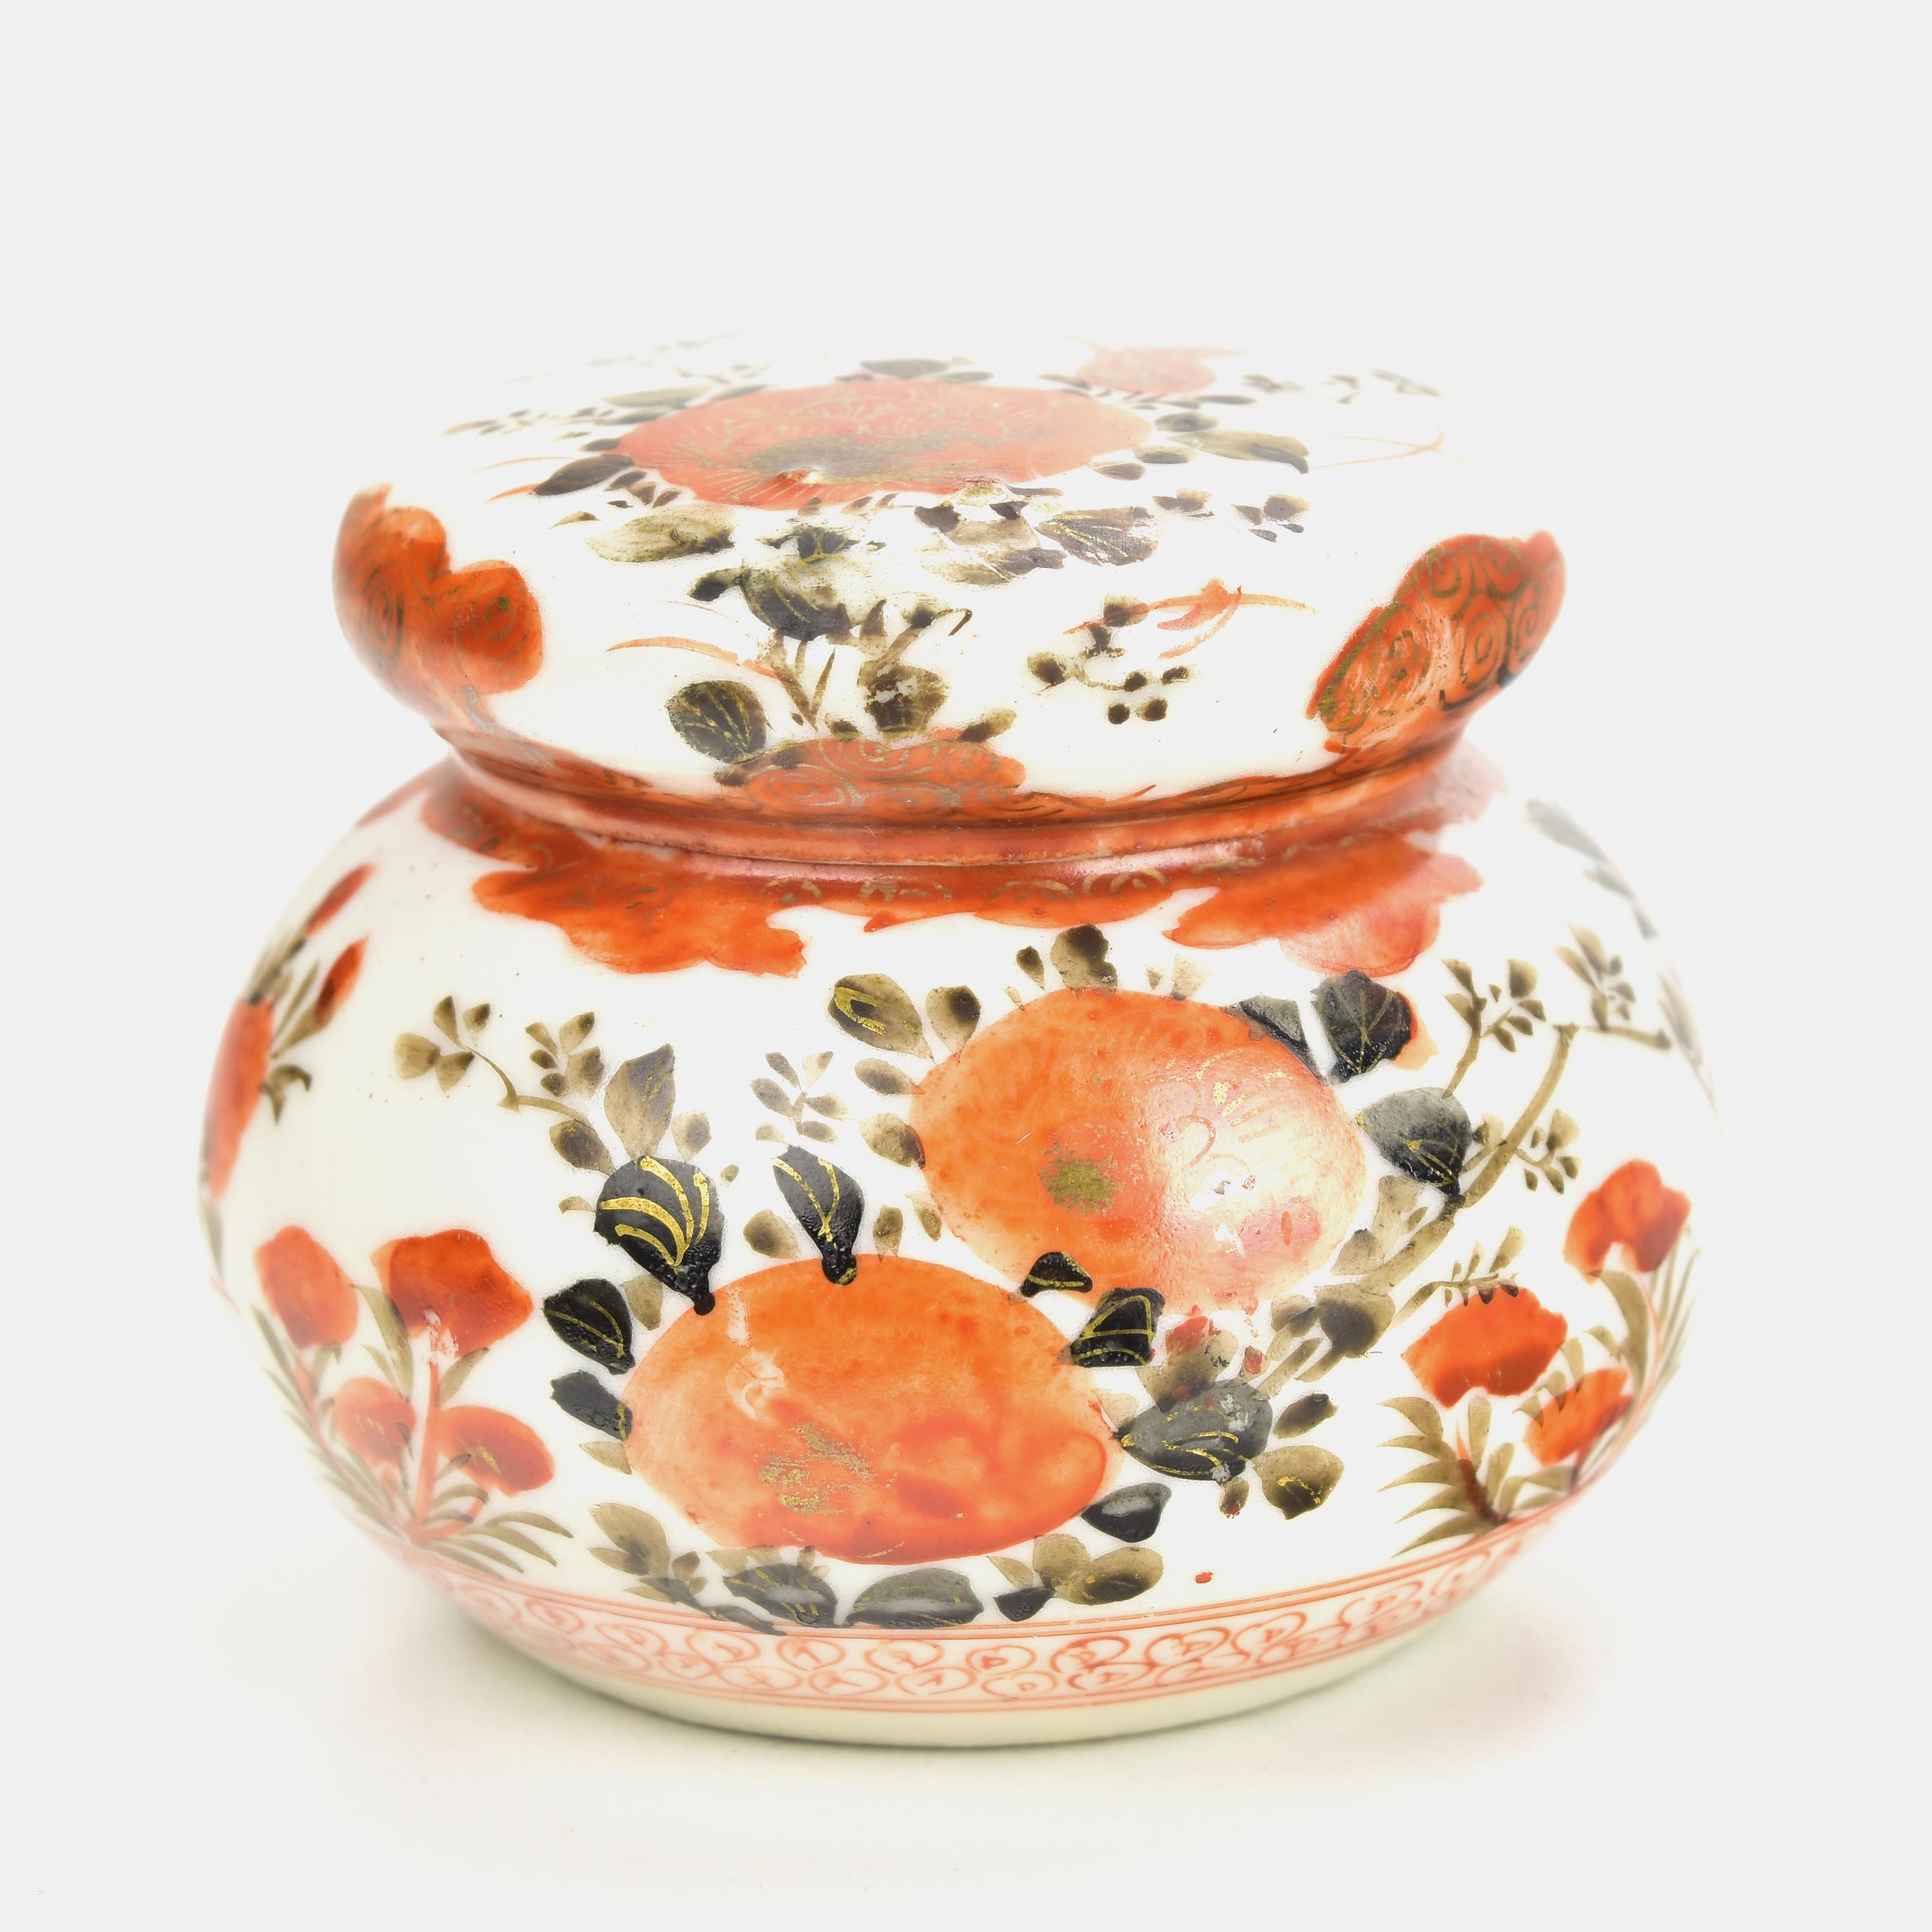 Antique Chinese Famille Rose inkwell with Hand-Painted Enamels Qing Dynasty

This lovely small antique Chinese Famille Rose inkwell hails from the late 19th century and is crafted from fine porcelain, it showcases intricately hand-painted enamels of